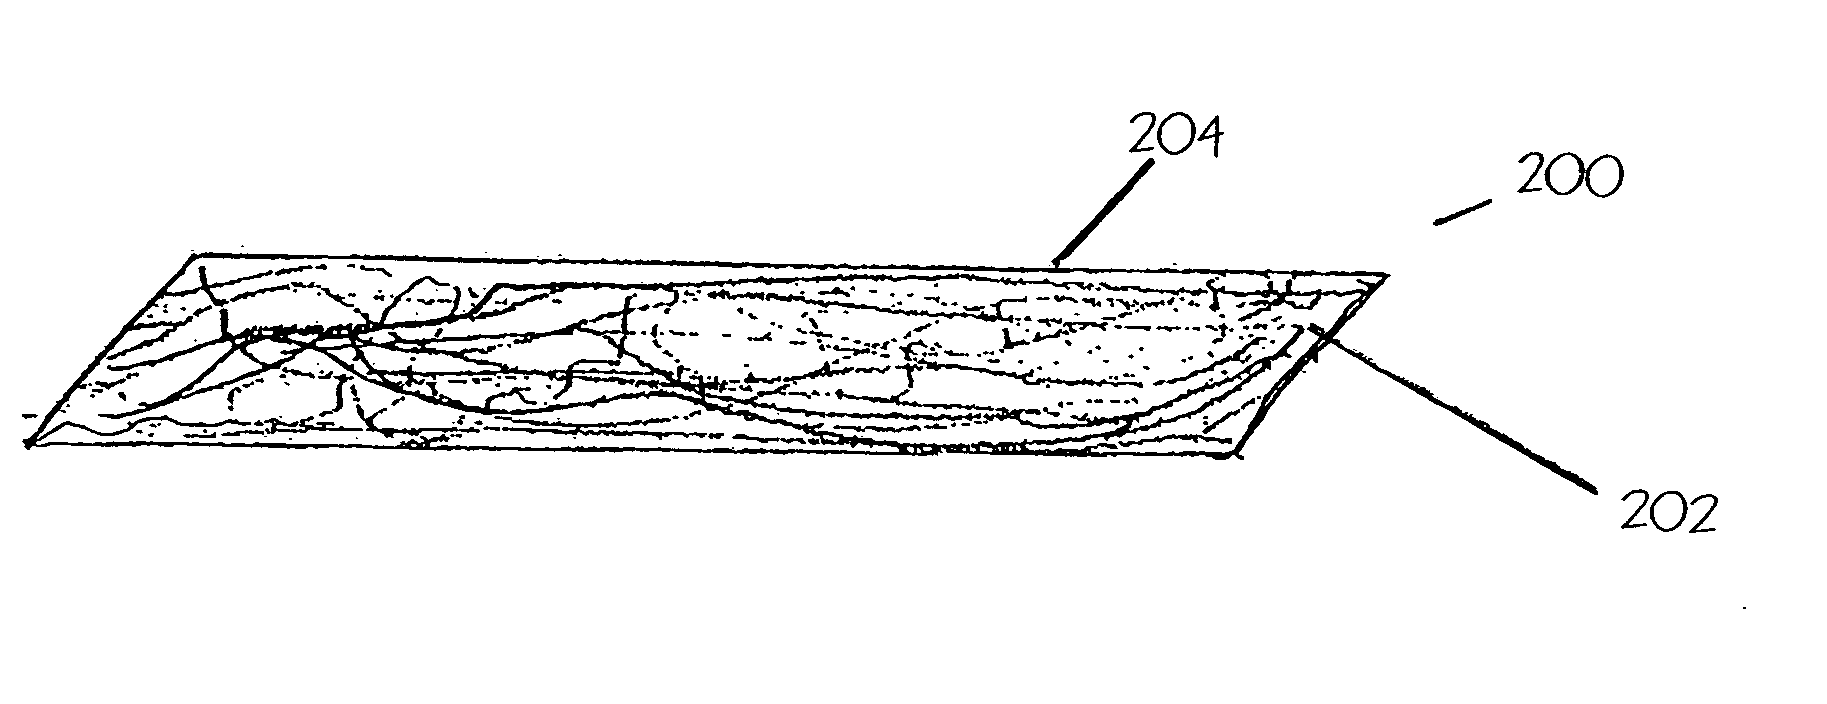 Wound packing material for use with suction